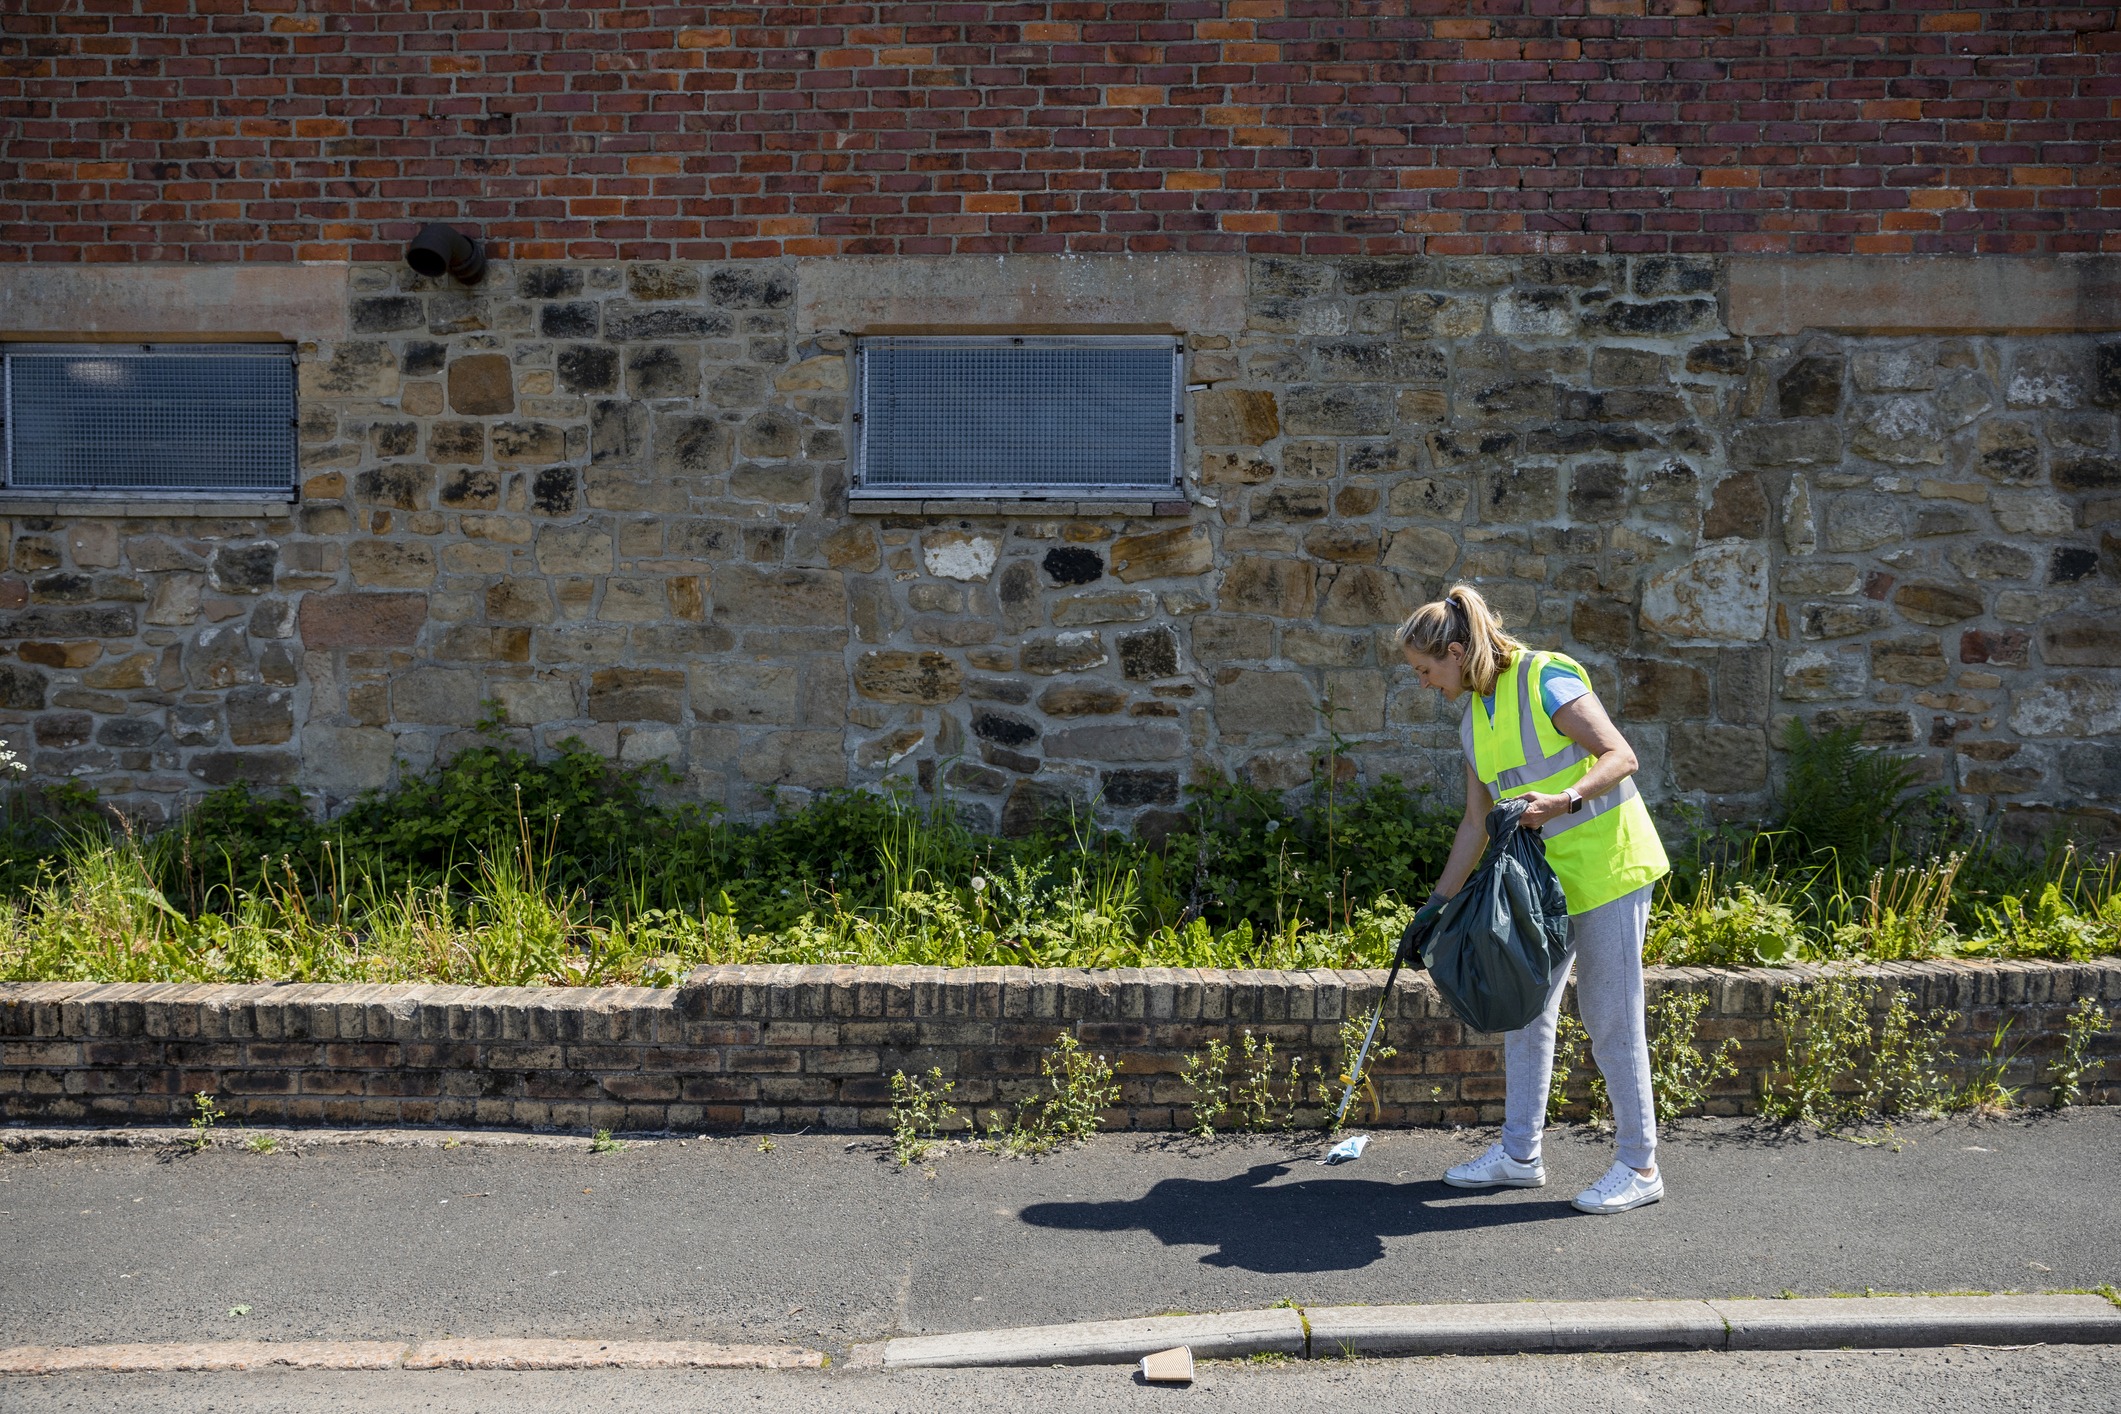 Side view of a woman litter picking in her community in the North East of England. She is wearing a high vis jacket and is using a grabber tool to put the litter into a garbage bag.